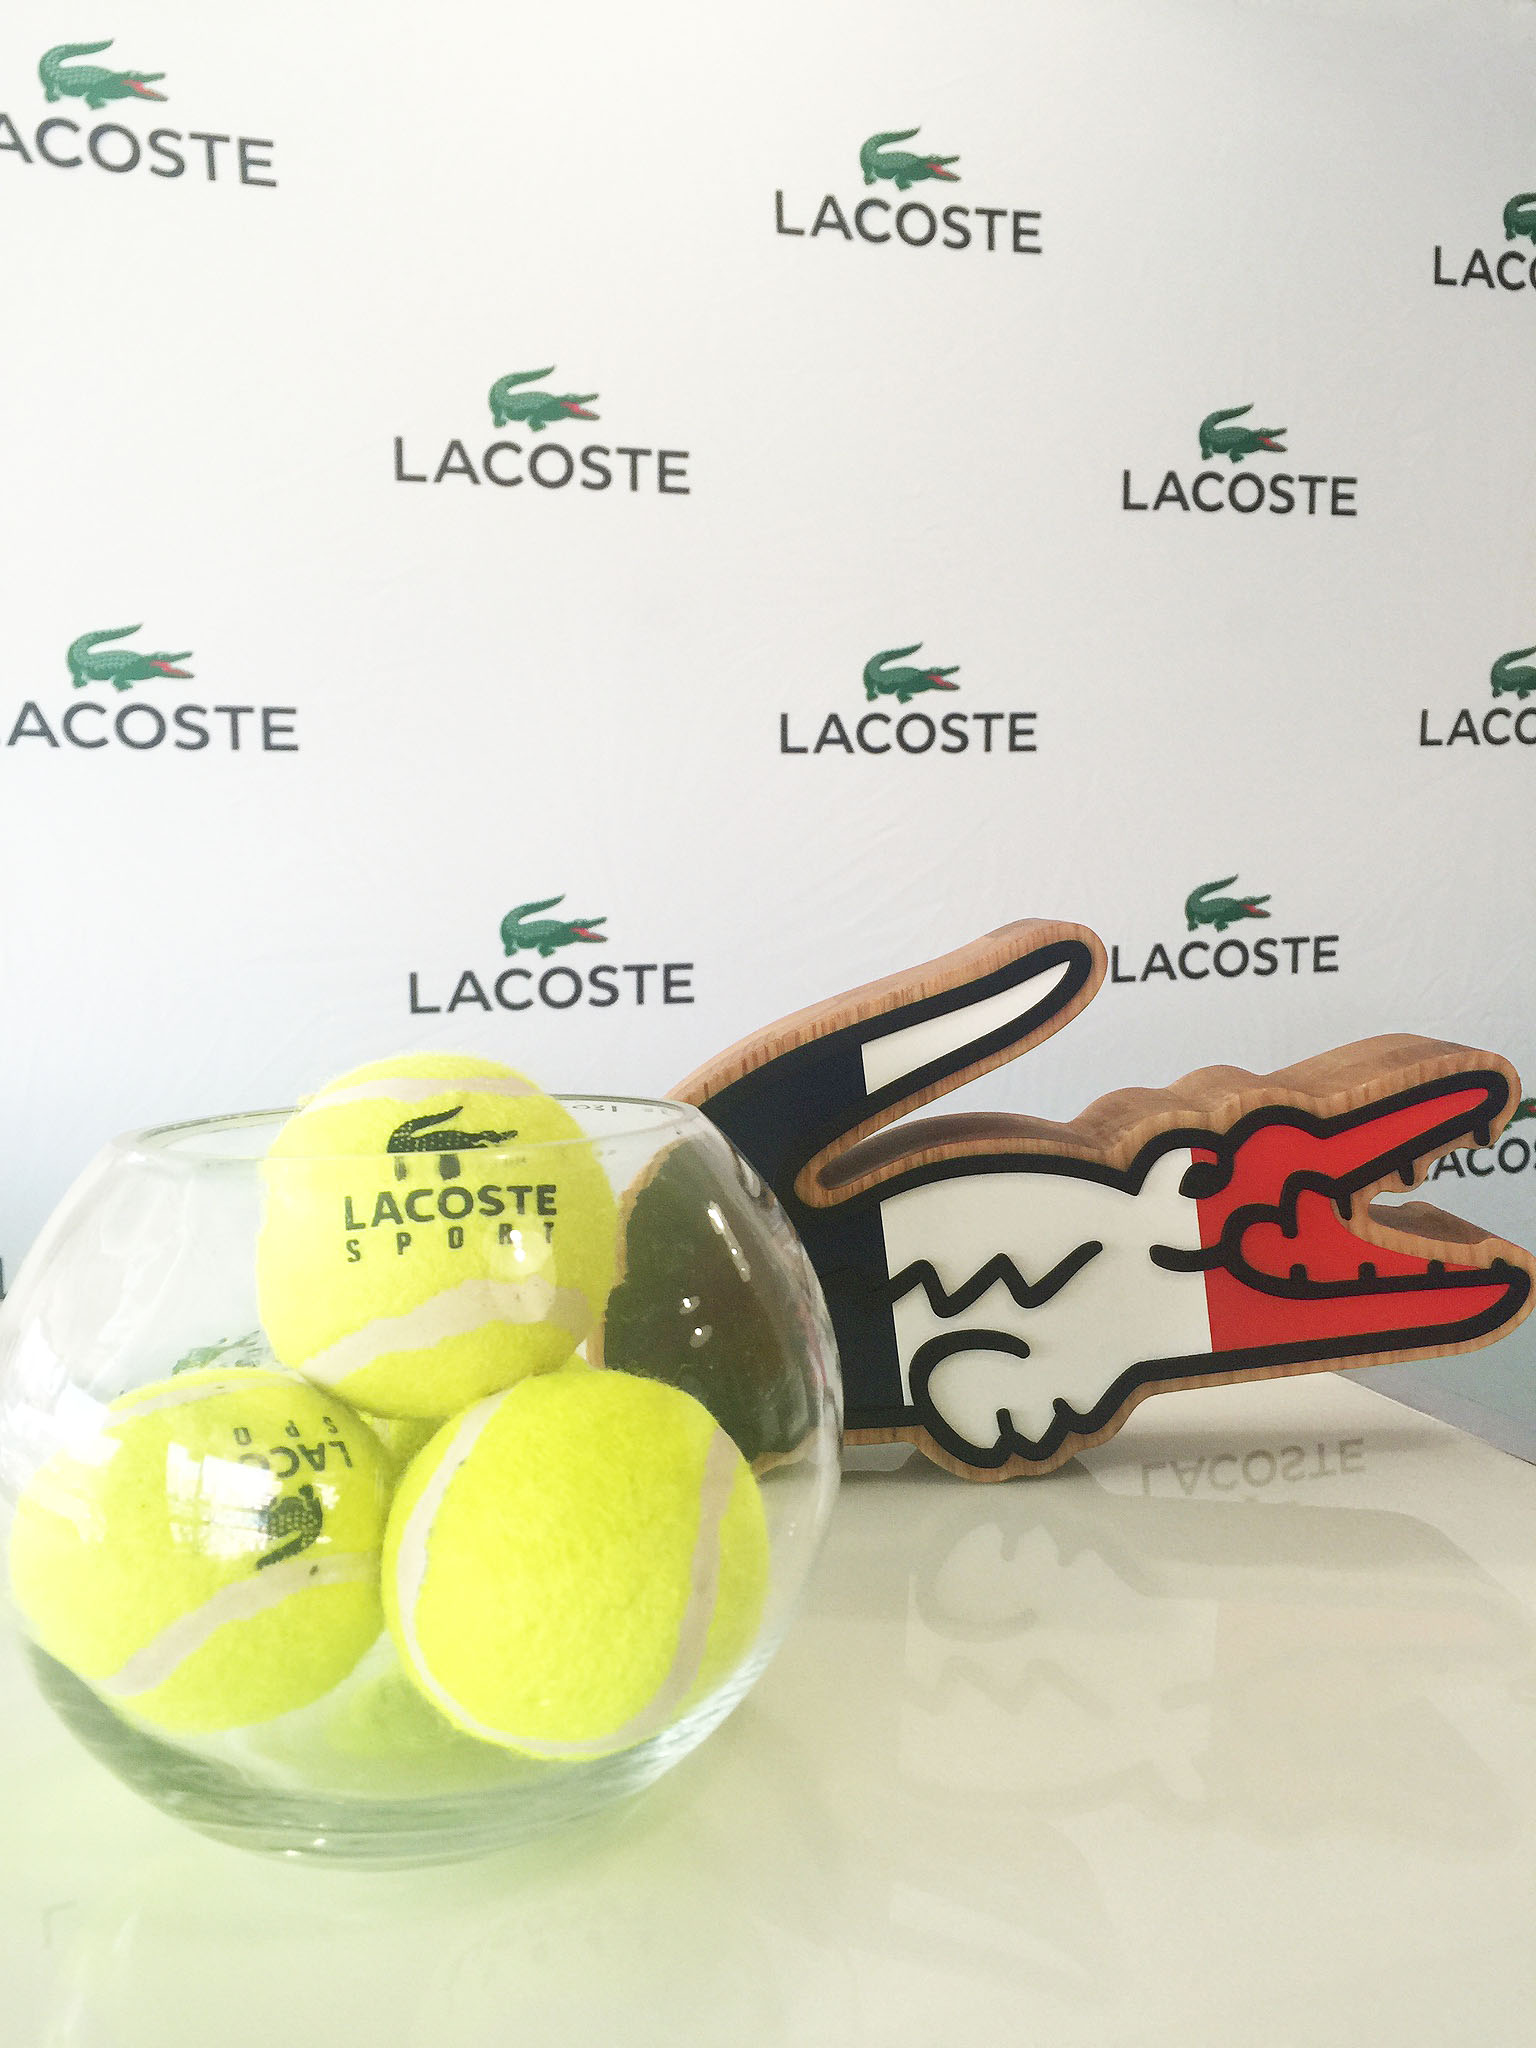 Rogers Cup with Lacoste 2016